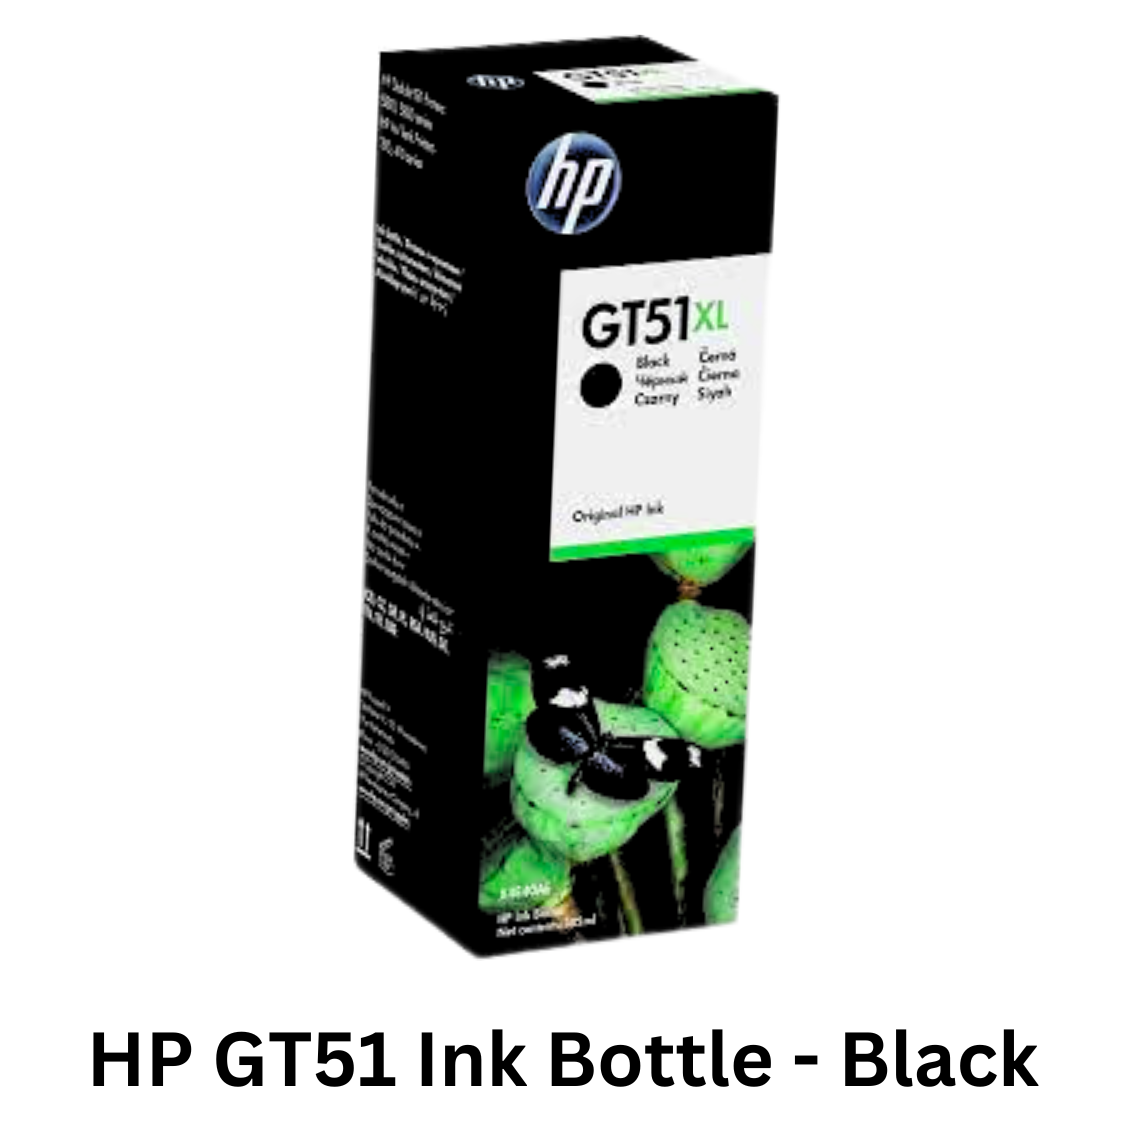 HP GT51 Ink Bottle - Black - Genuine HP ink for reliable and high-quality black prints, designed for consistent performance and durability